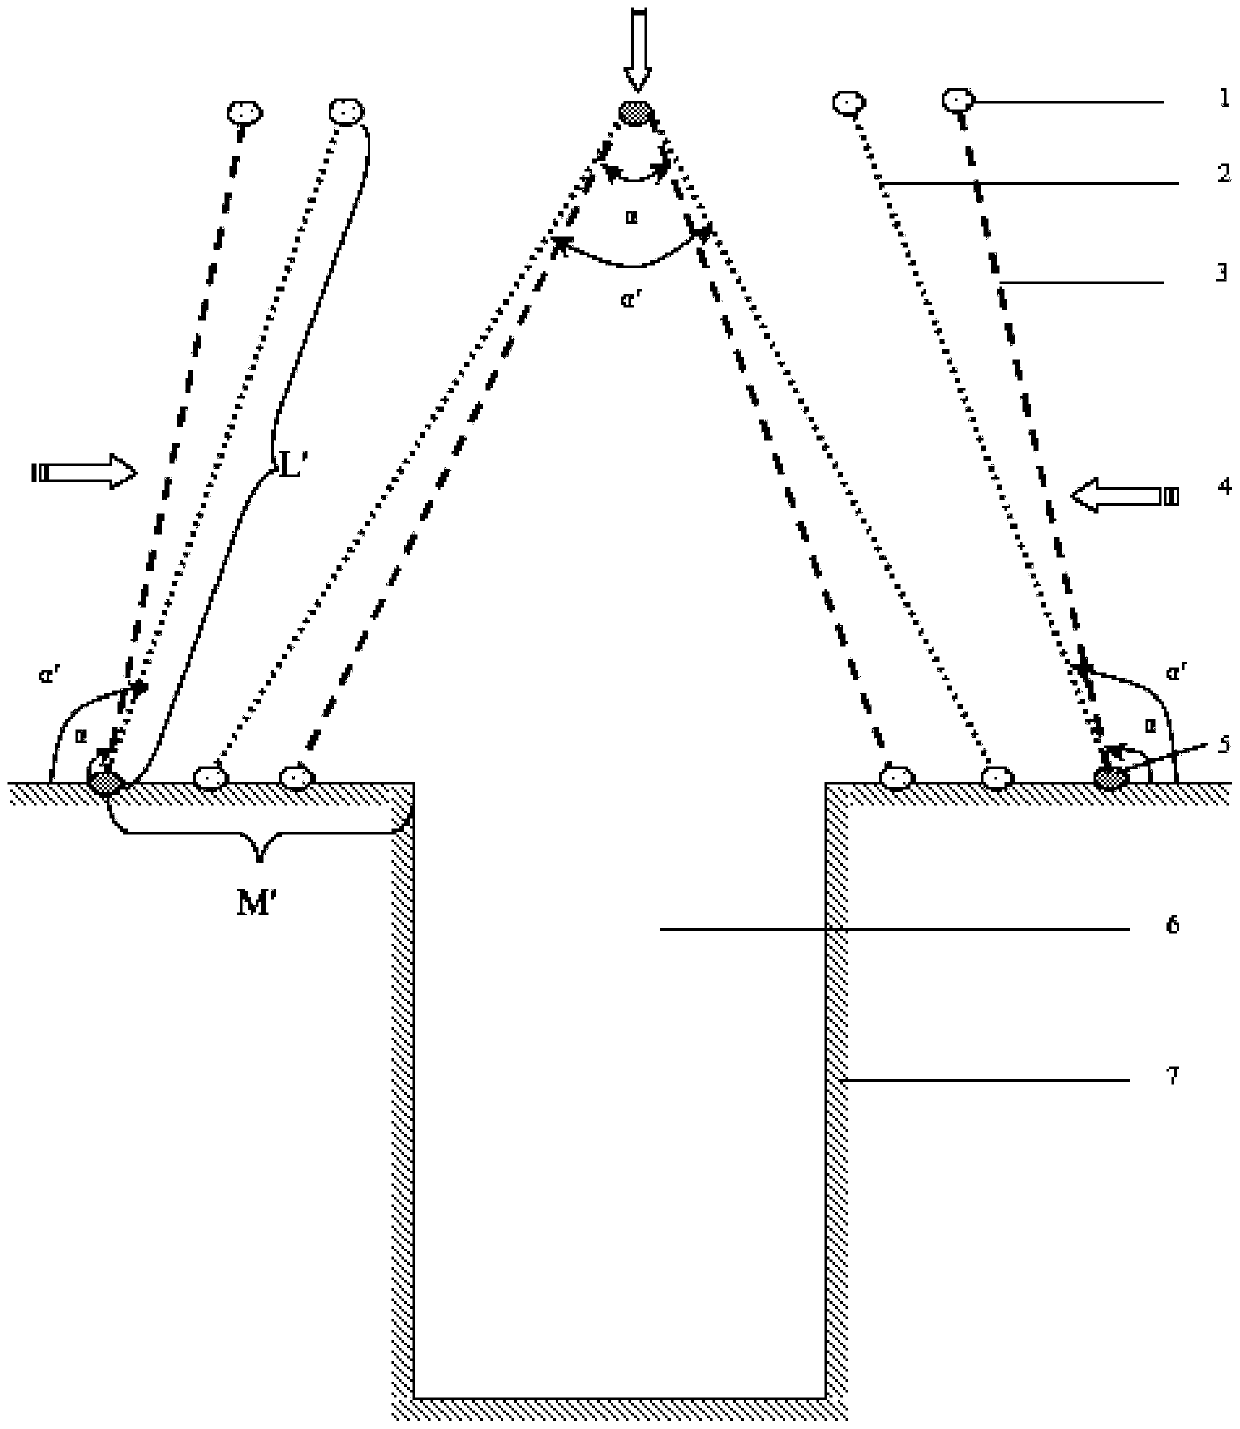 A movable marine floating object interception and dredging net and its application method